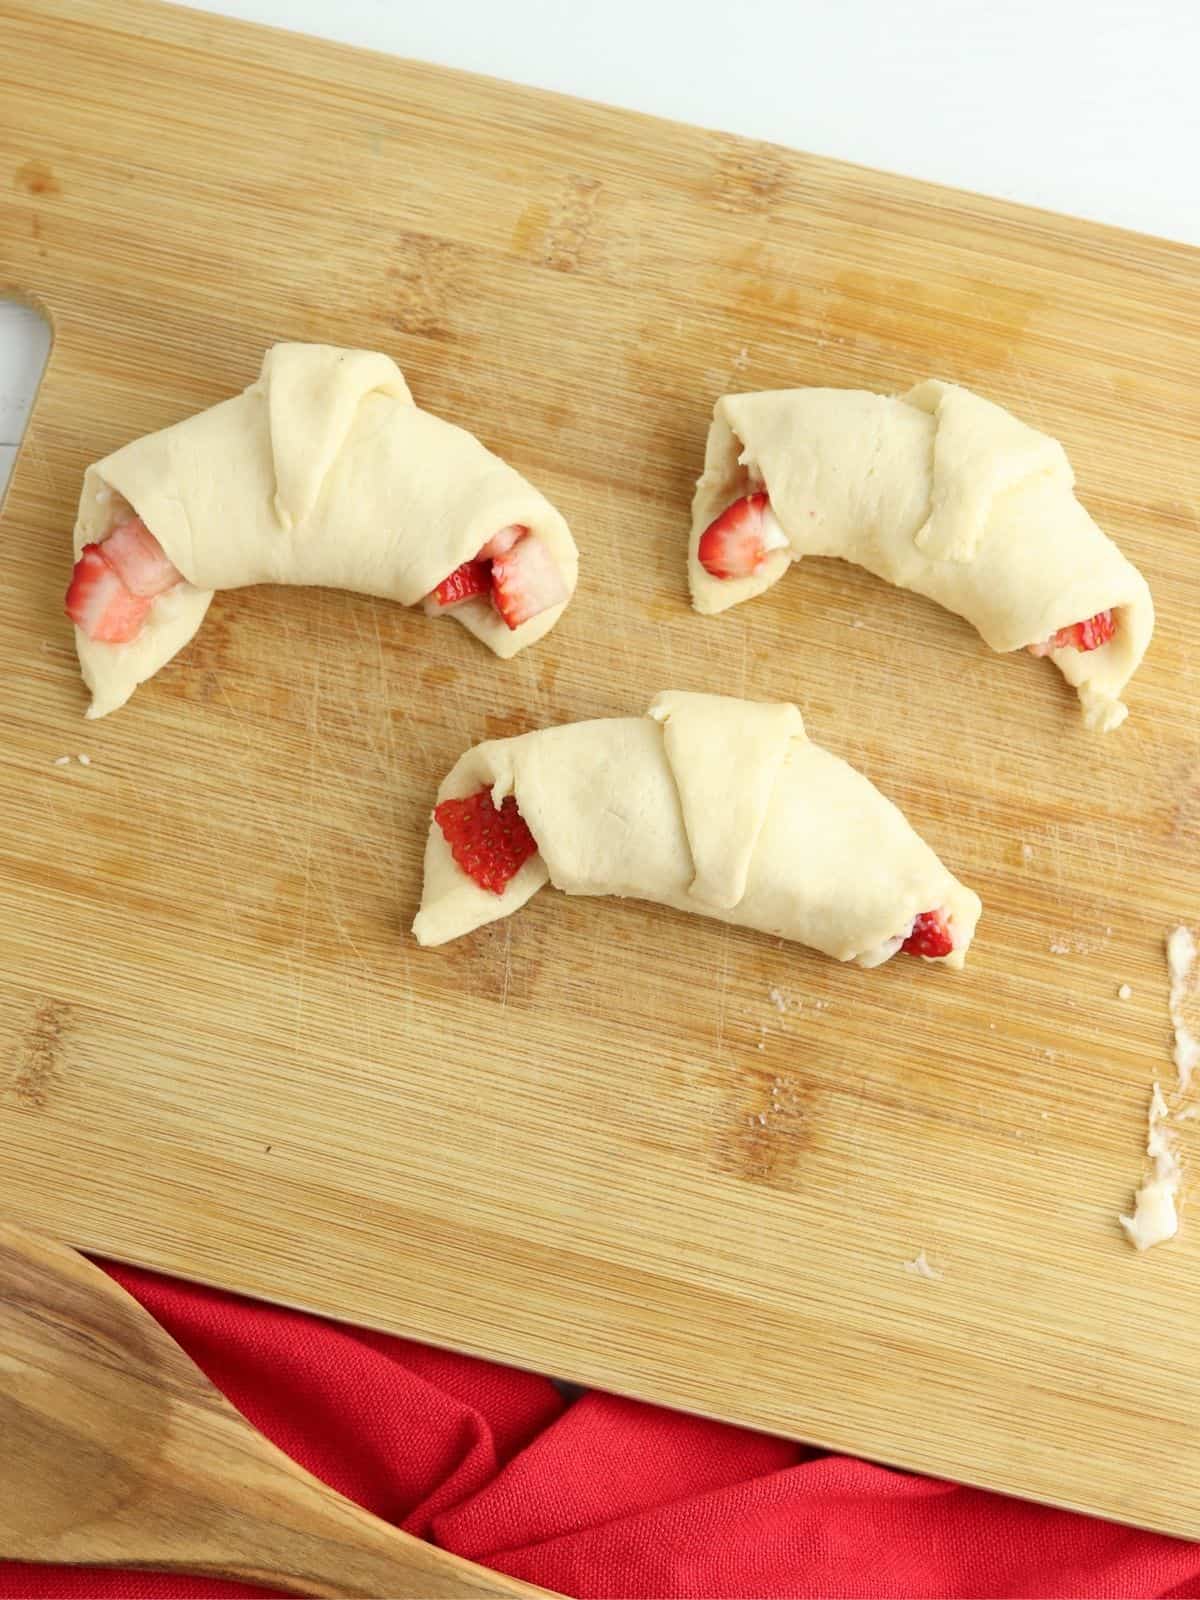 crescent rolls filled with strawberries on cutting board.